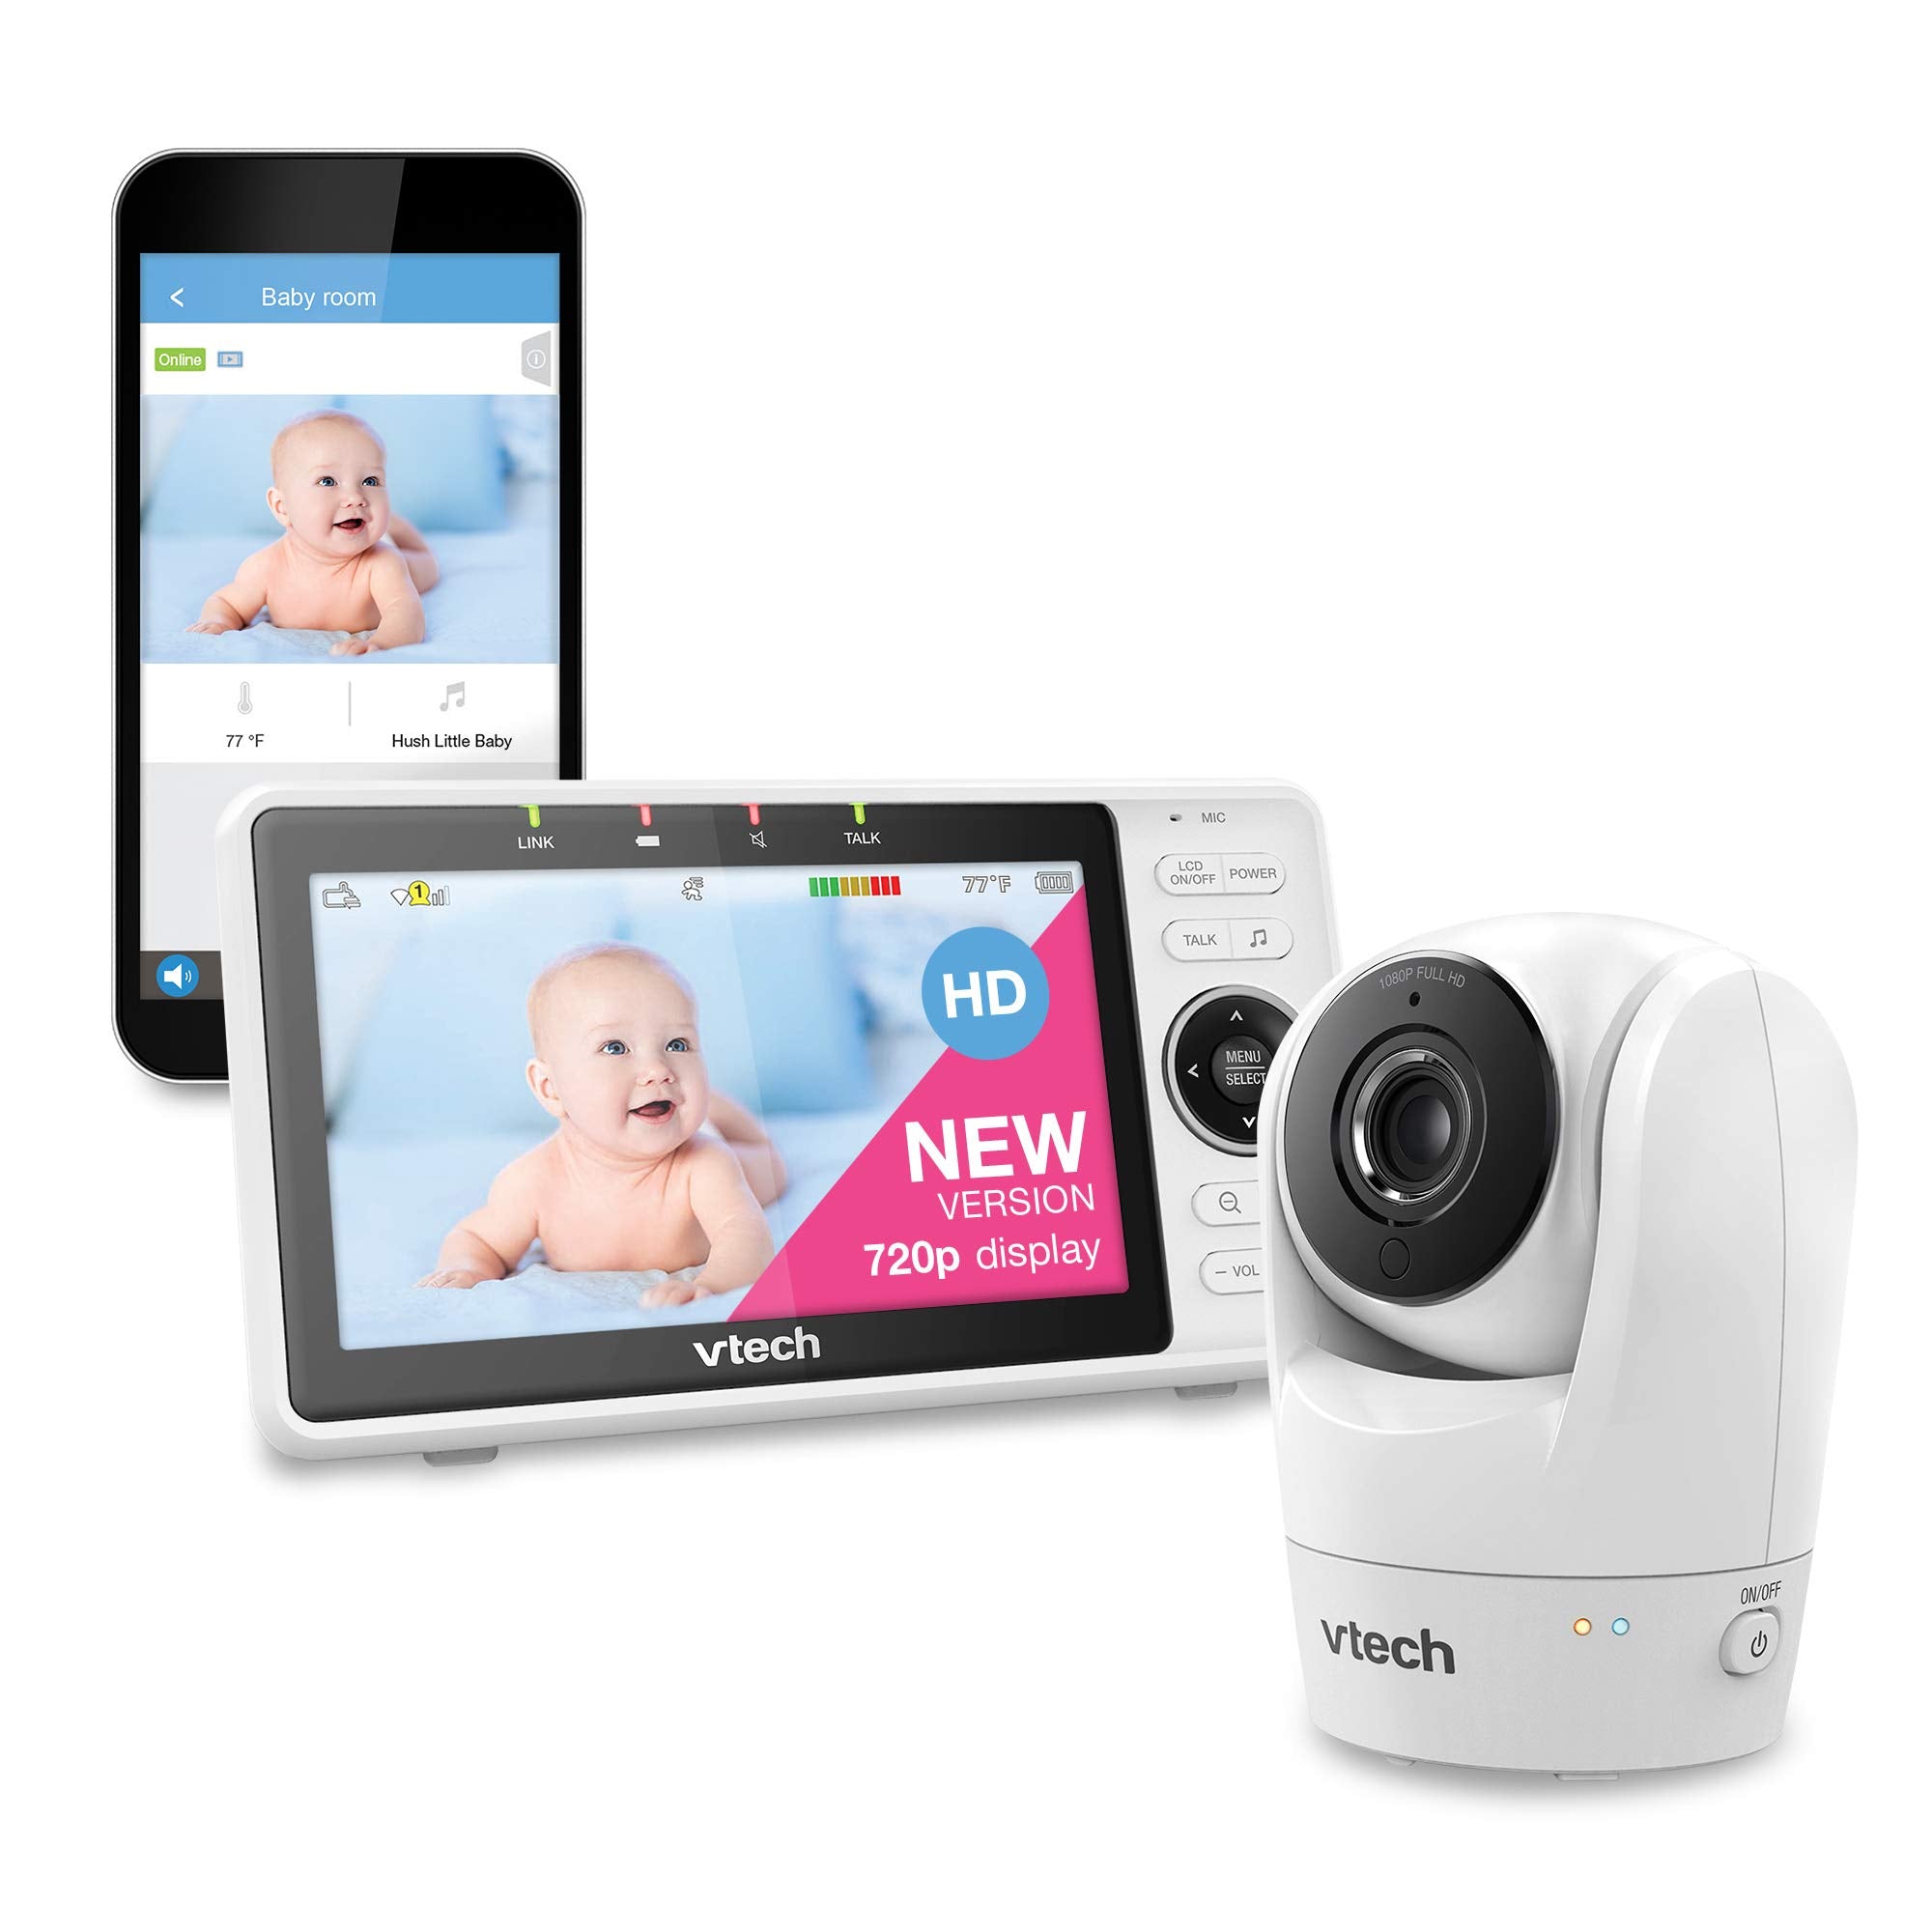 VTech VM901-1W WiFi Baby Monitor, Upgraded 5-inch 720p Display, 1080p Camera, True-Color DayVision, HD NightVision, Fully Remote Pan Tilt Zoom, 2-Way Talk, Free Remote Access, Works with iOS, Android